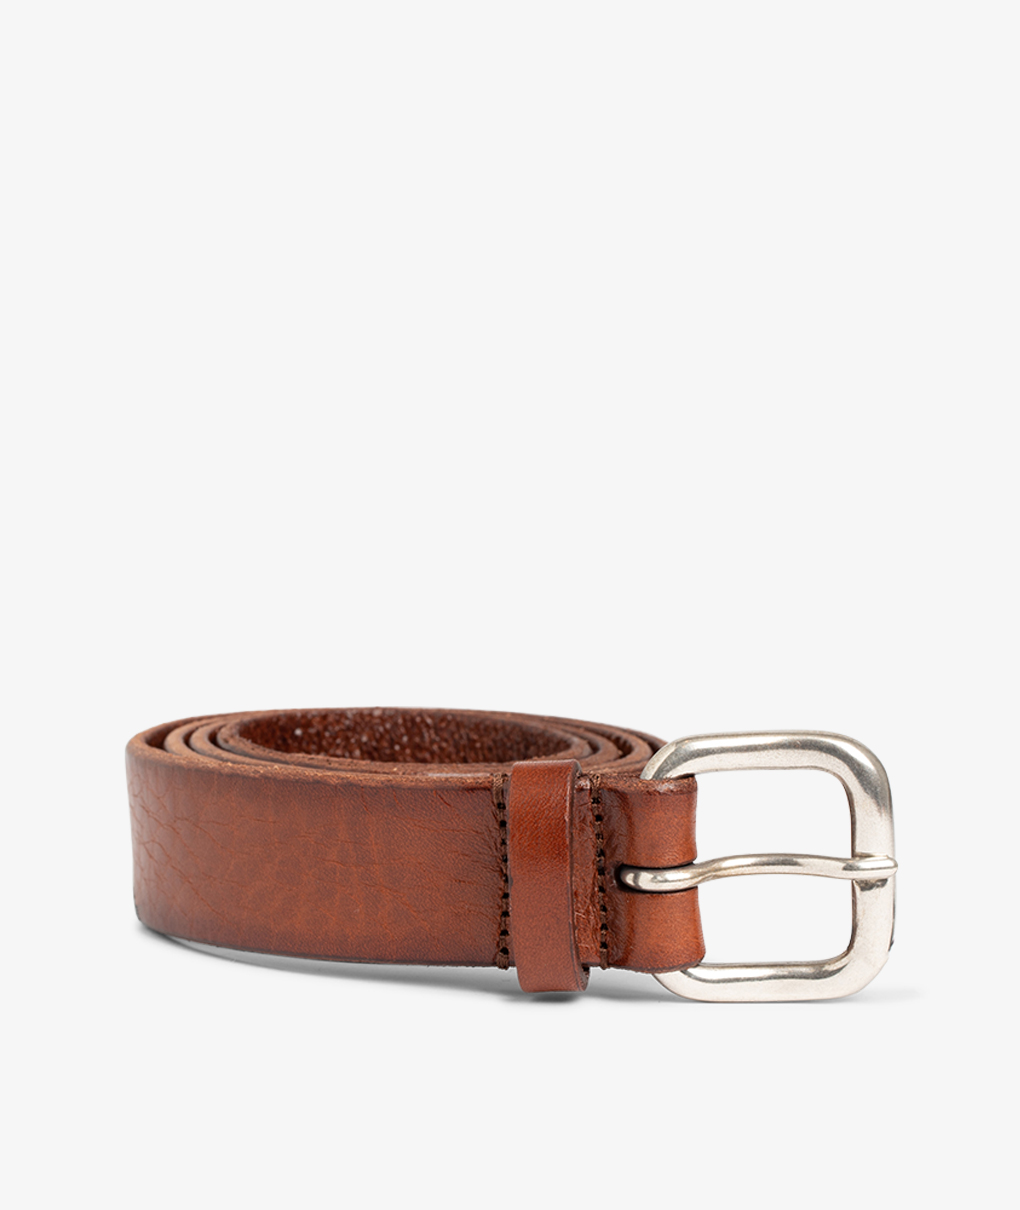 Norse Store  Shipping Worldwide - Anderson's Leather Belt - Cognac